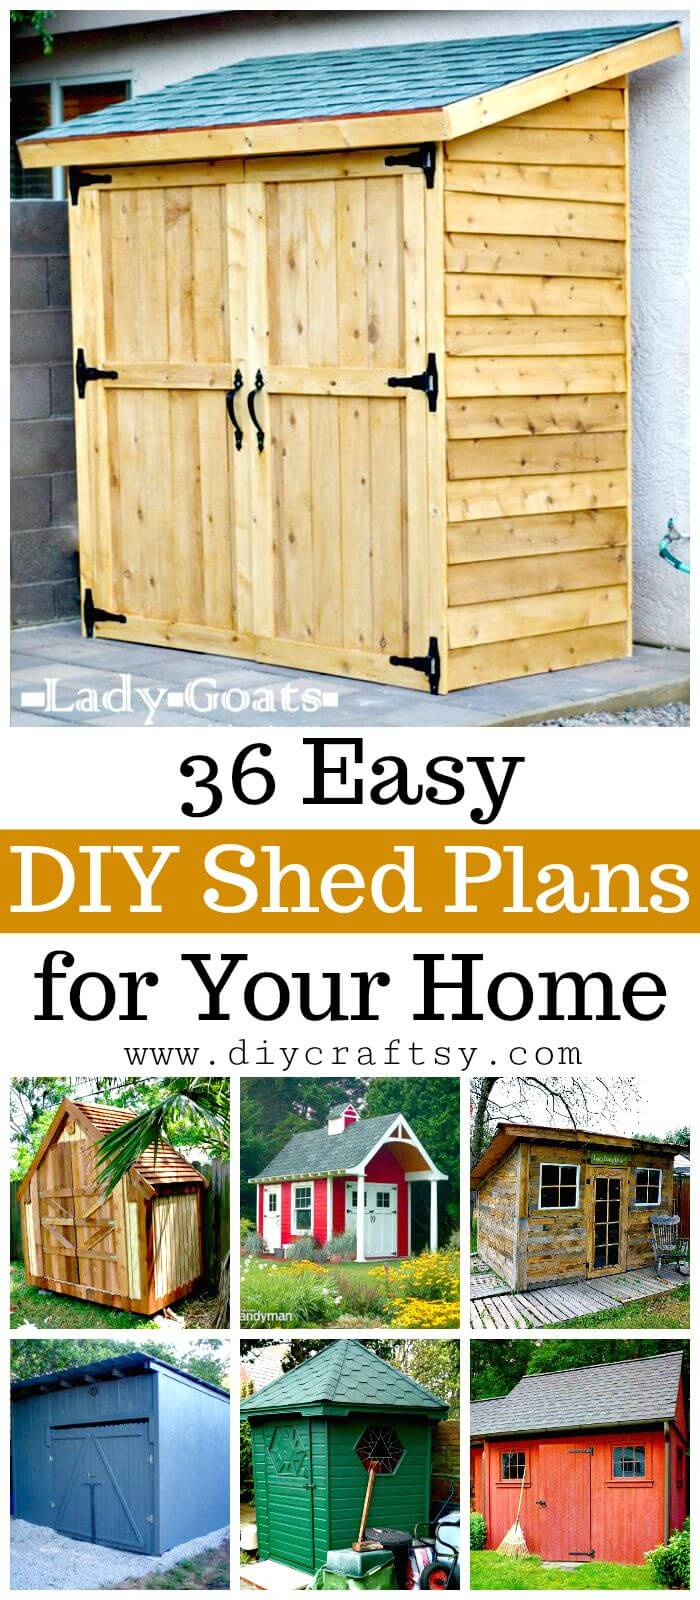 DIY-Shed-Plans-36-Easy-DIY-Shed-Designs-for-Your-Home